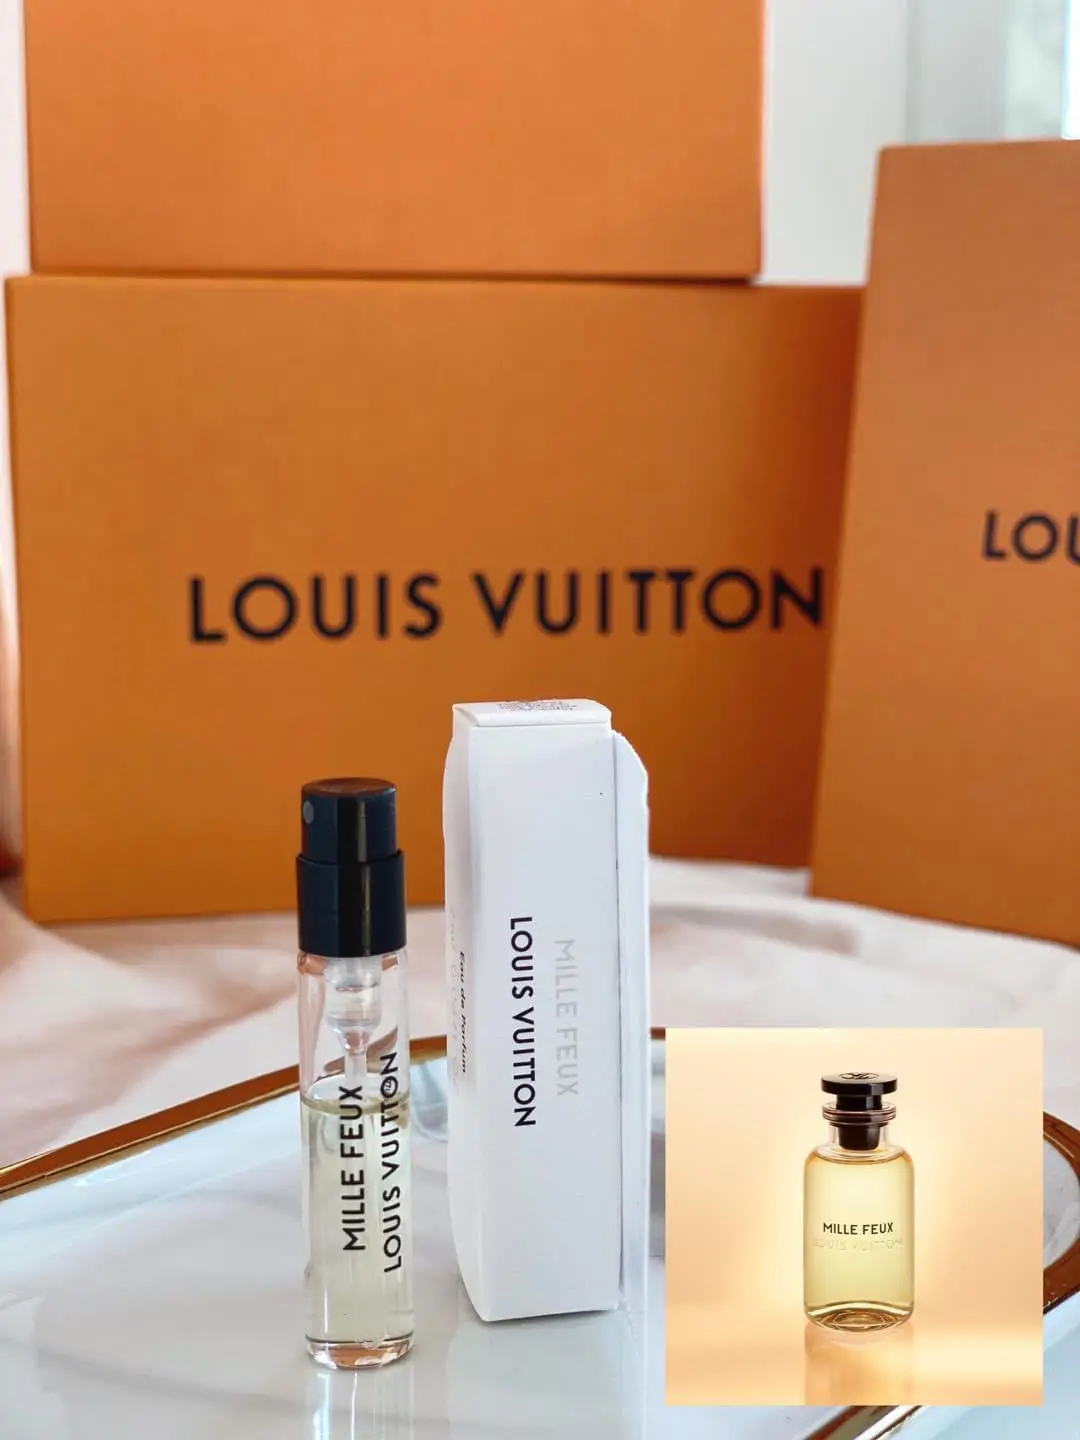 Louis Vuitton Perfume Samples with Gift Box